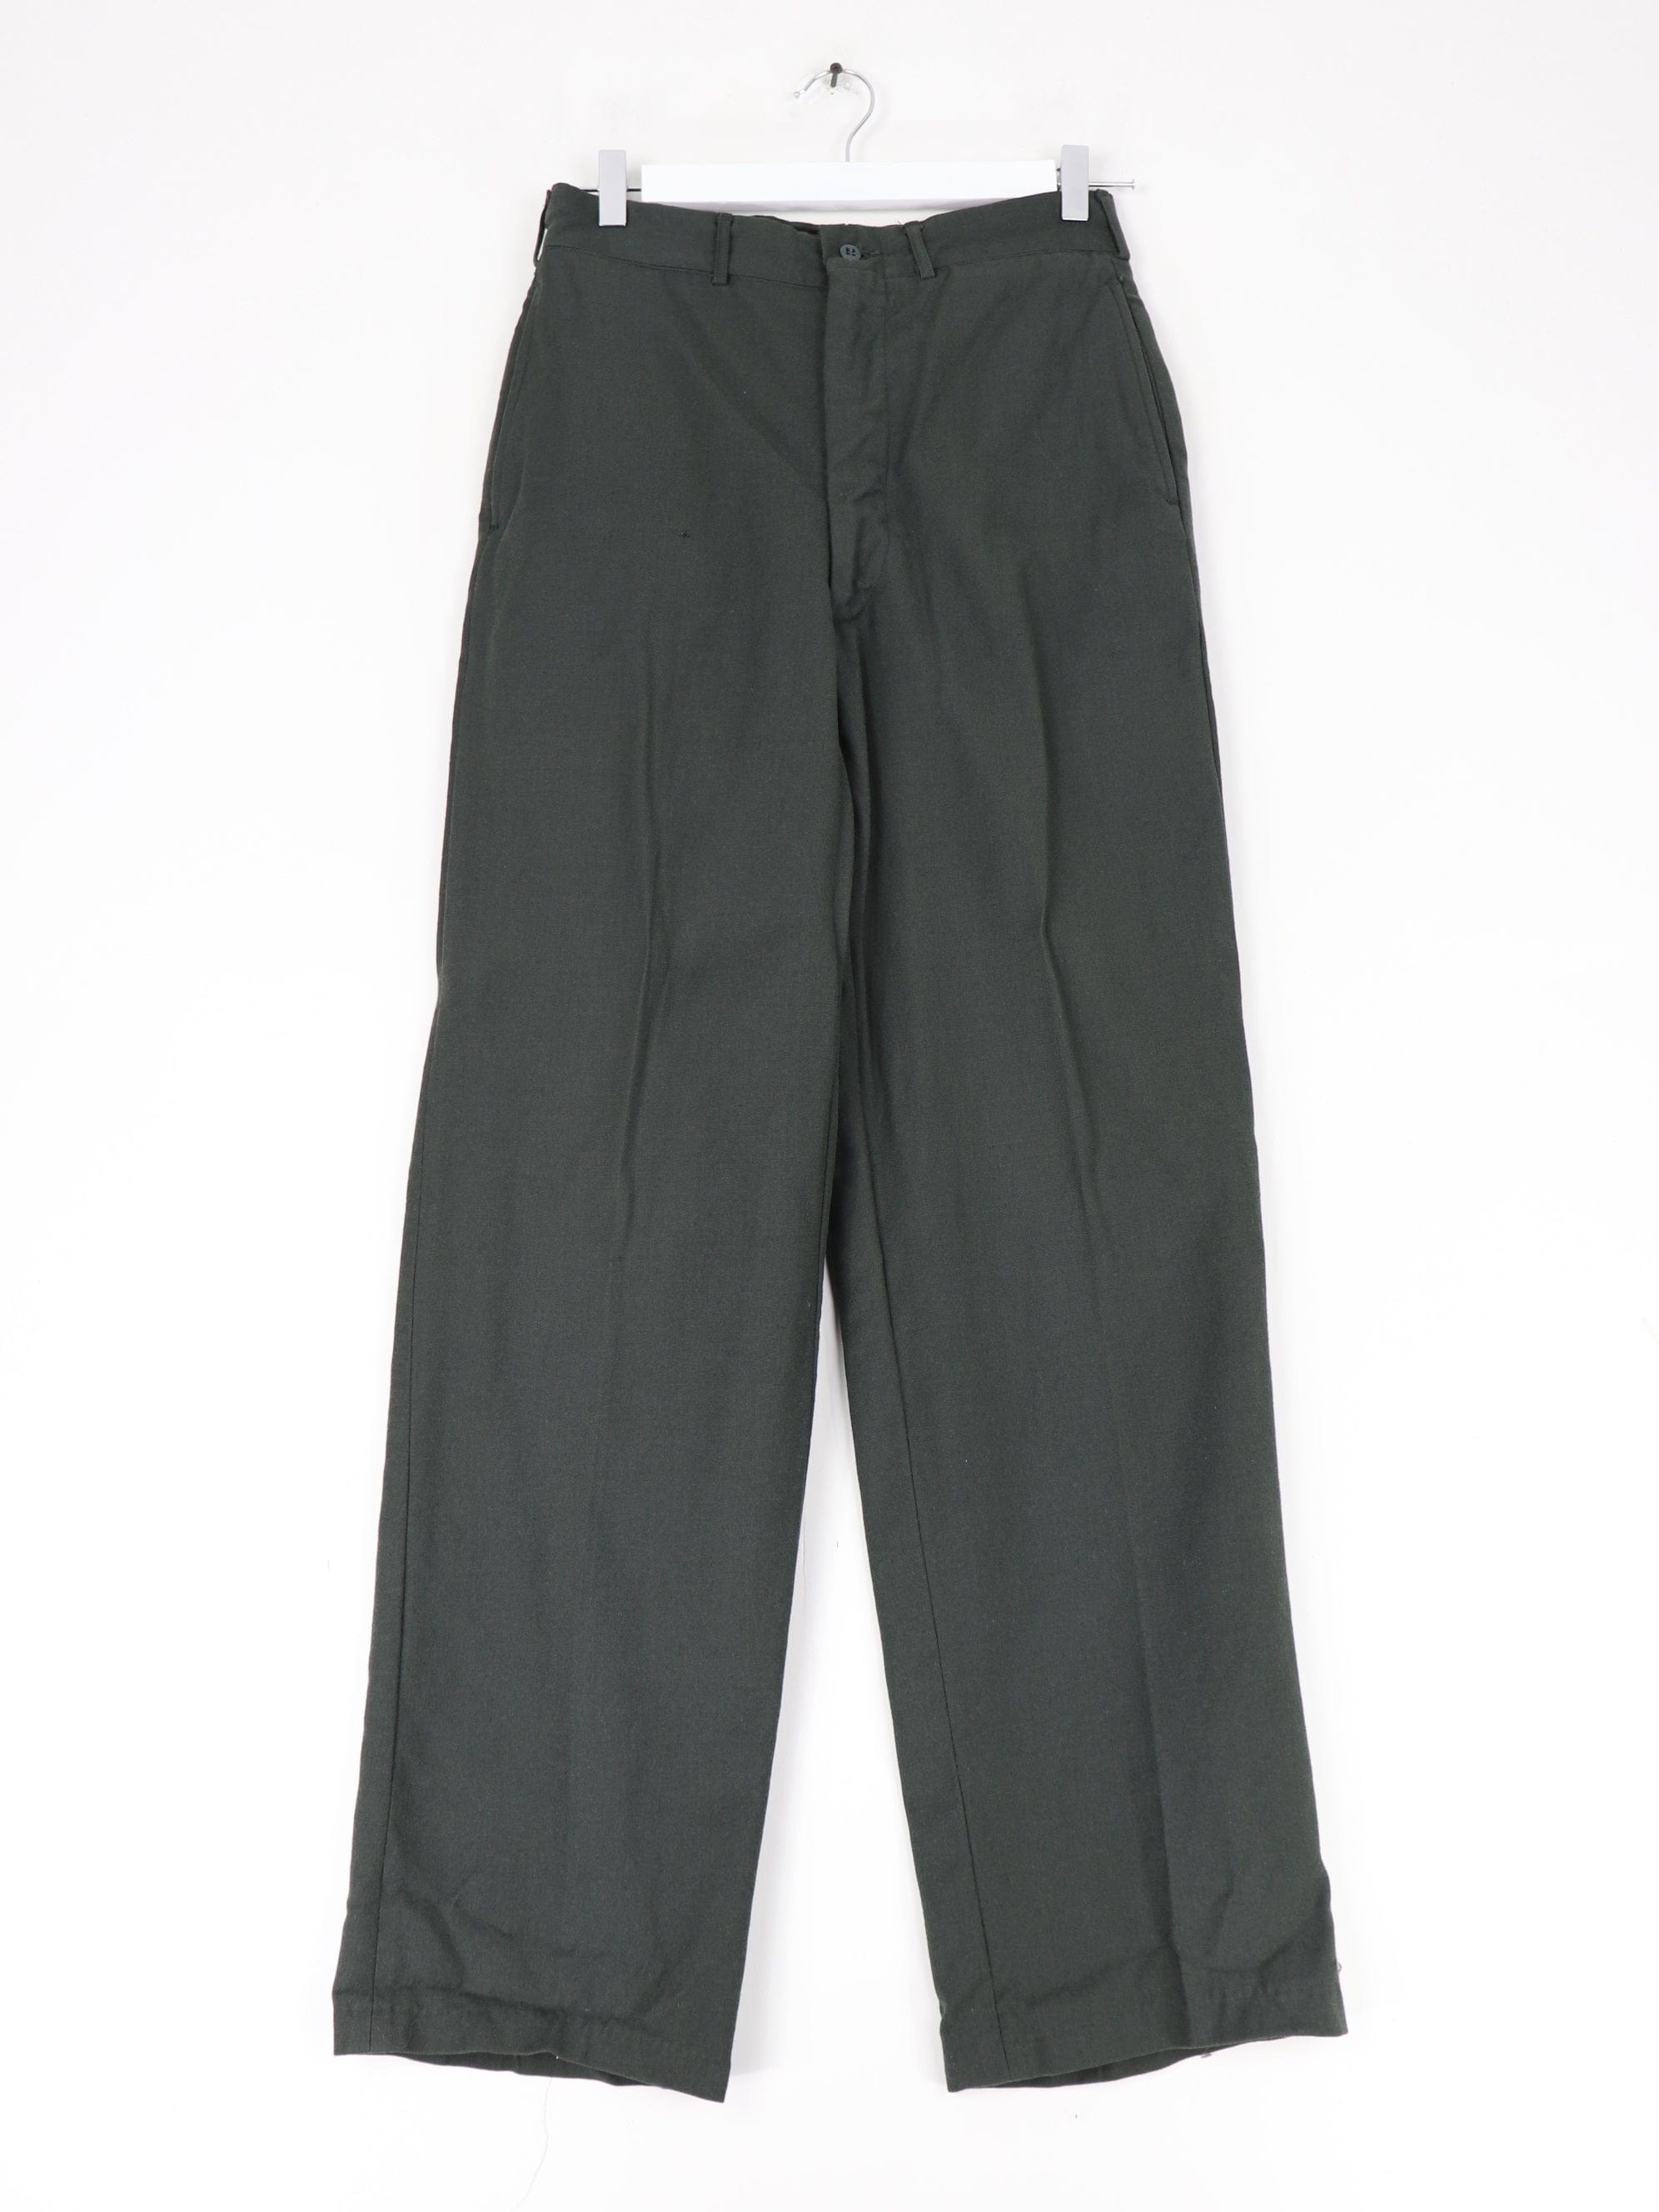 Vintage Military Pants Mens 28 x 30 Green Army Trousers Wool 70s 80s –  Proper Vintage